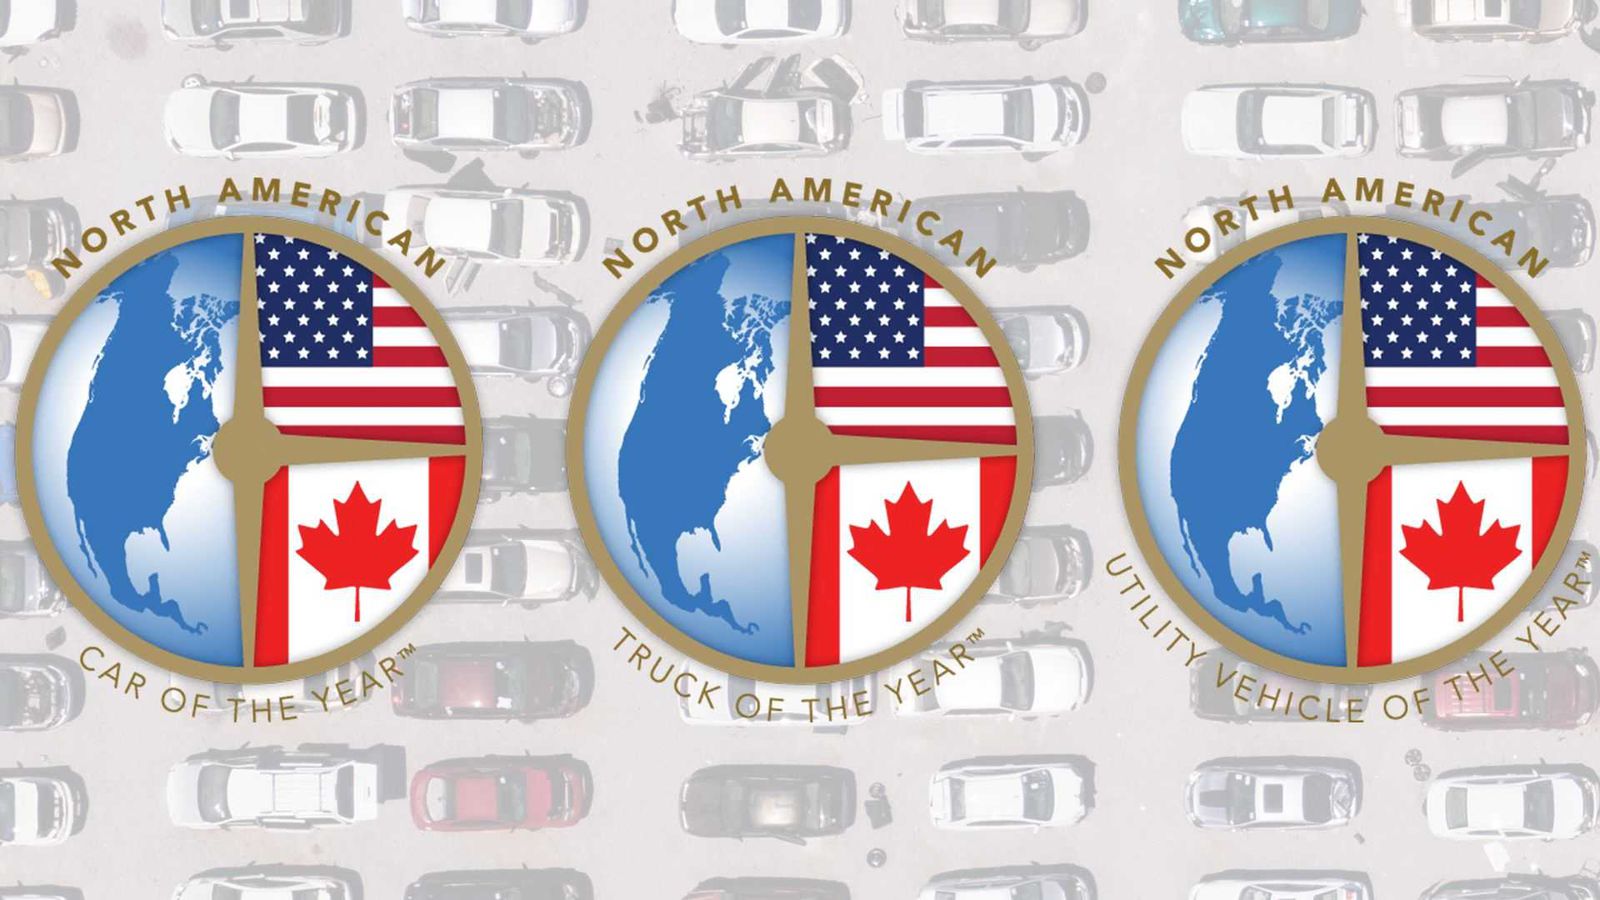 North American Car, Truck and Utility Vehicle of the Year Awards
™ существует с 1994 года